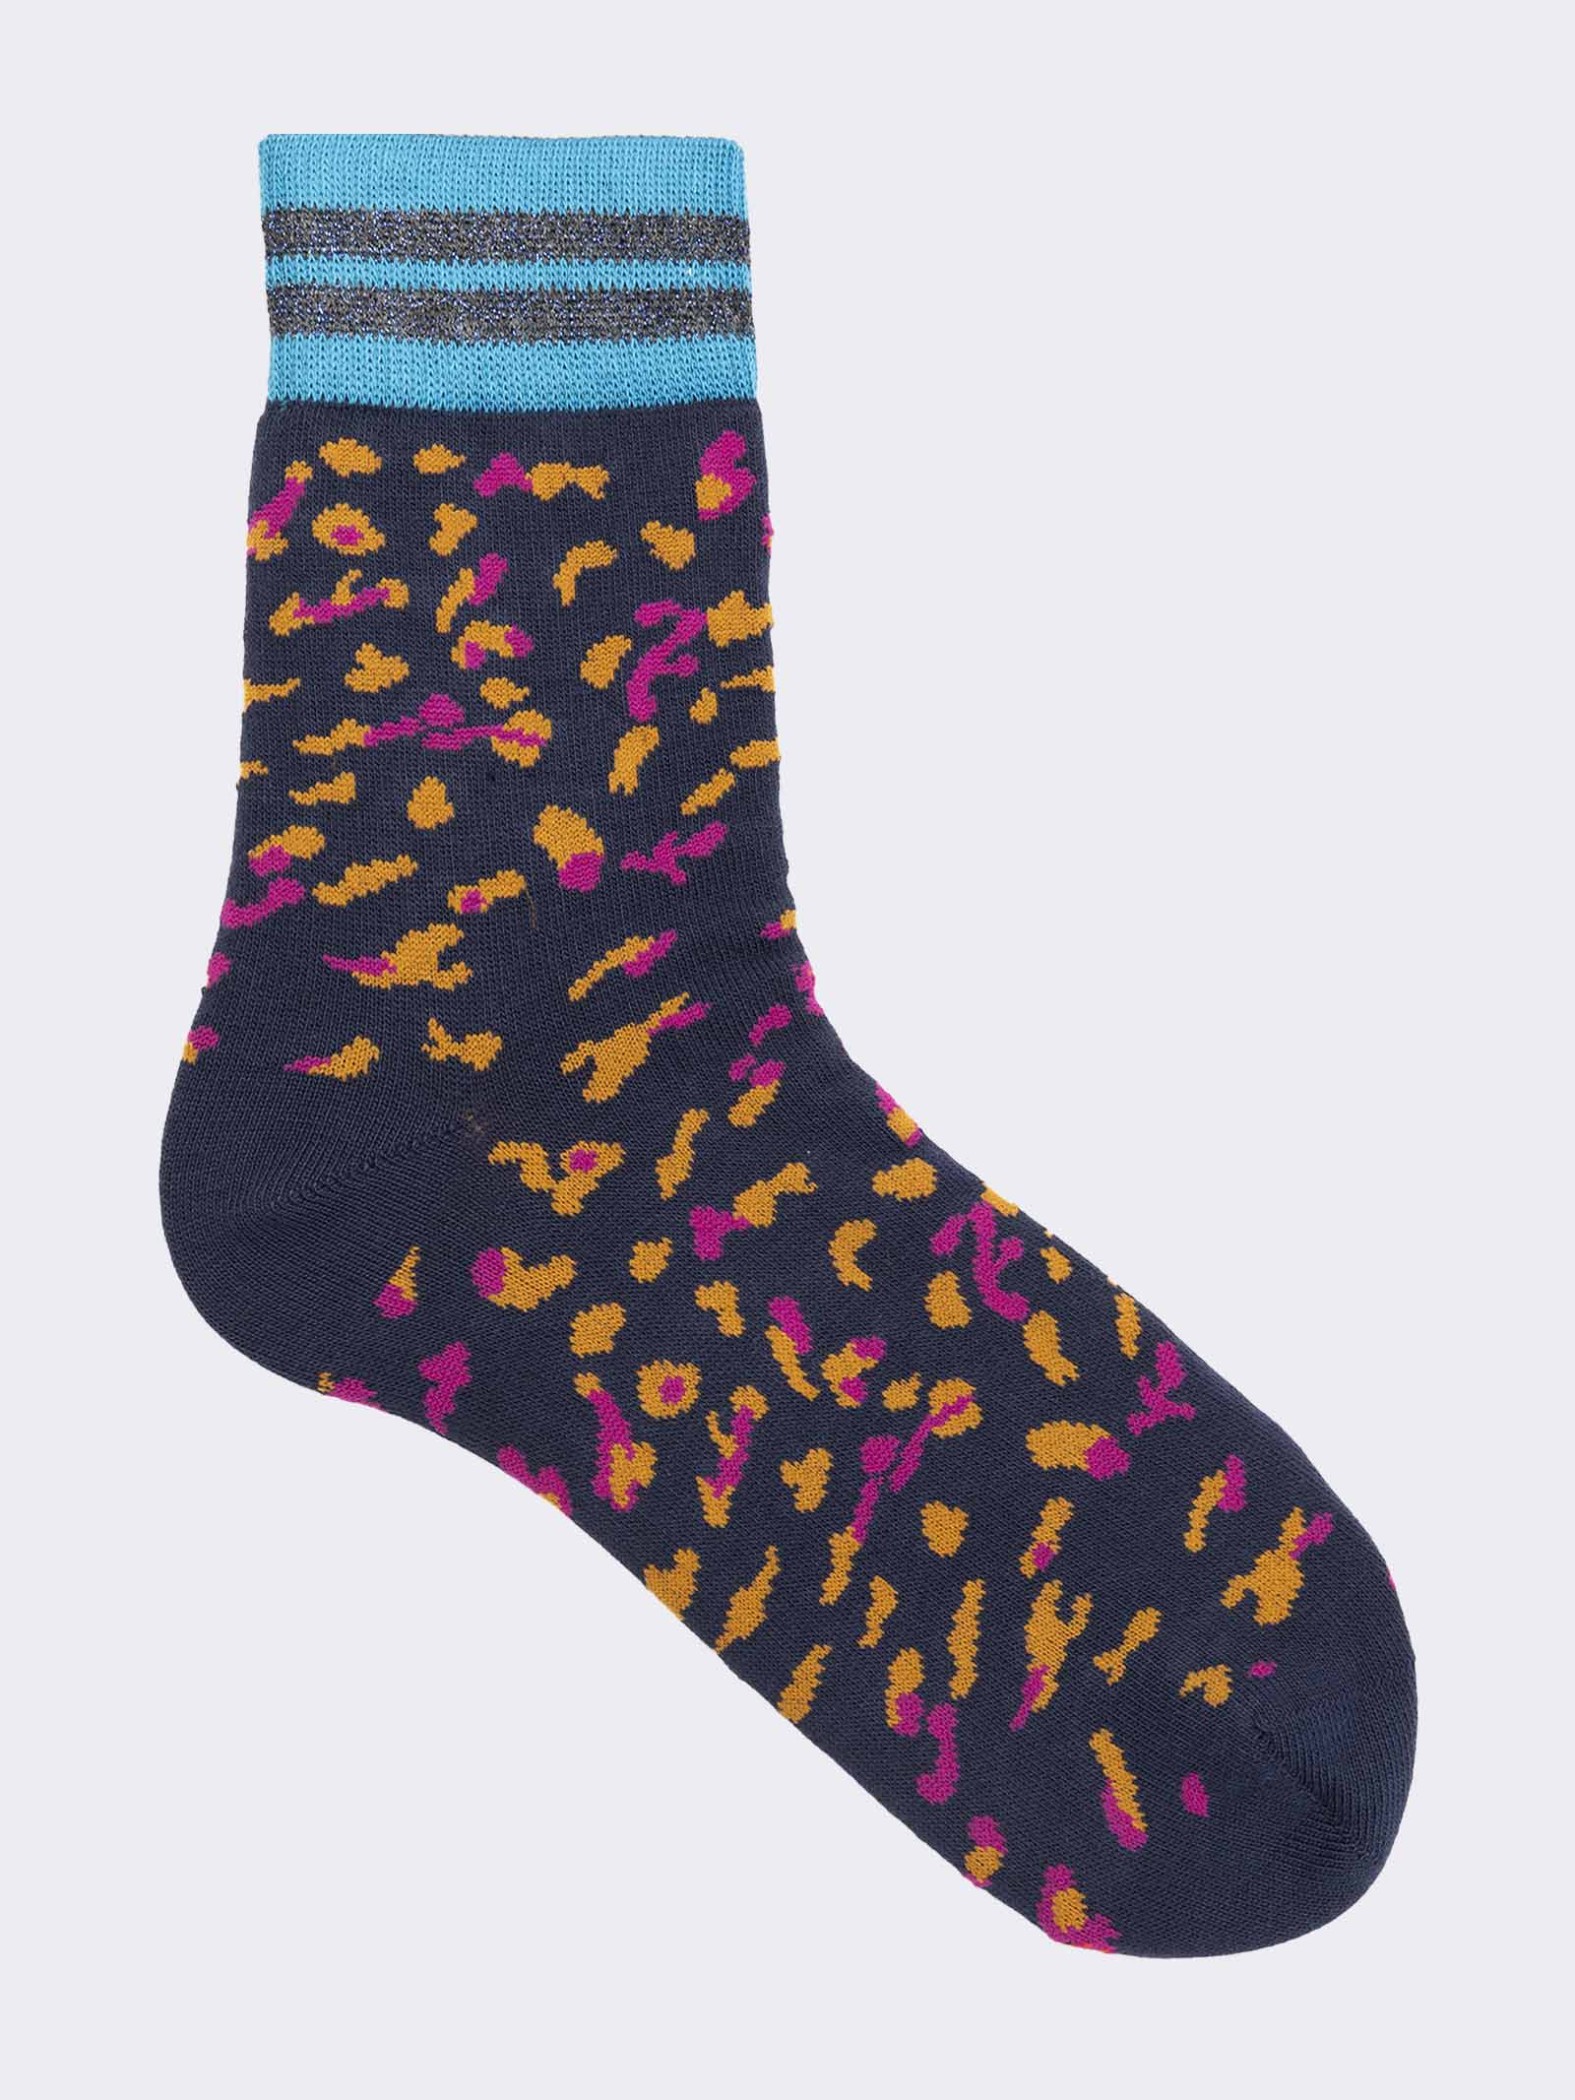 Women's animal patterned short socks in warm cotton - Made in Italy